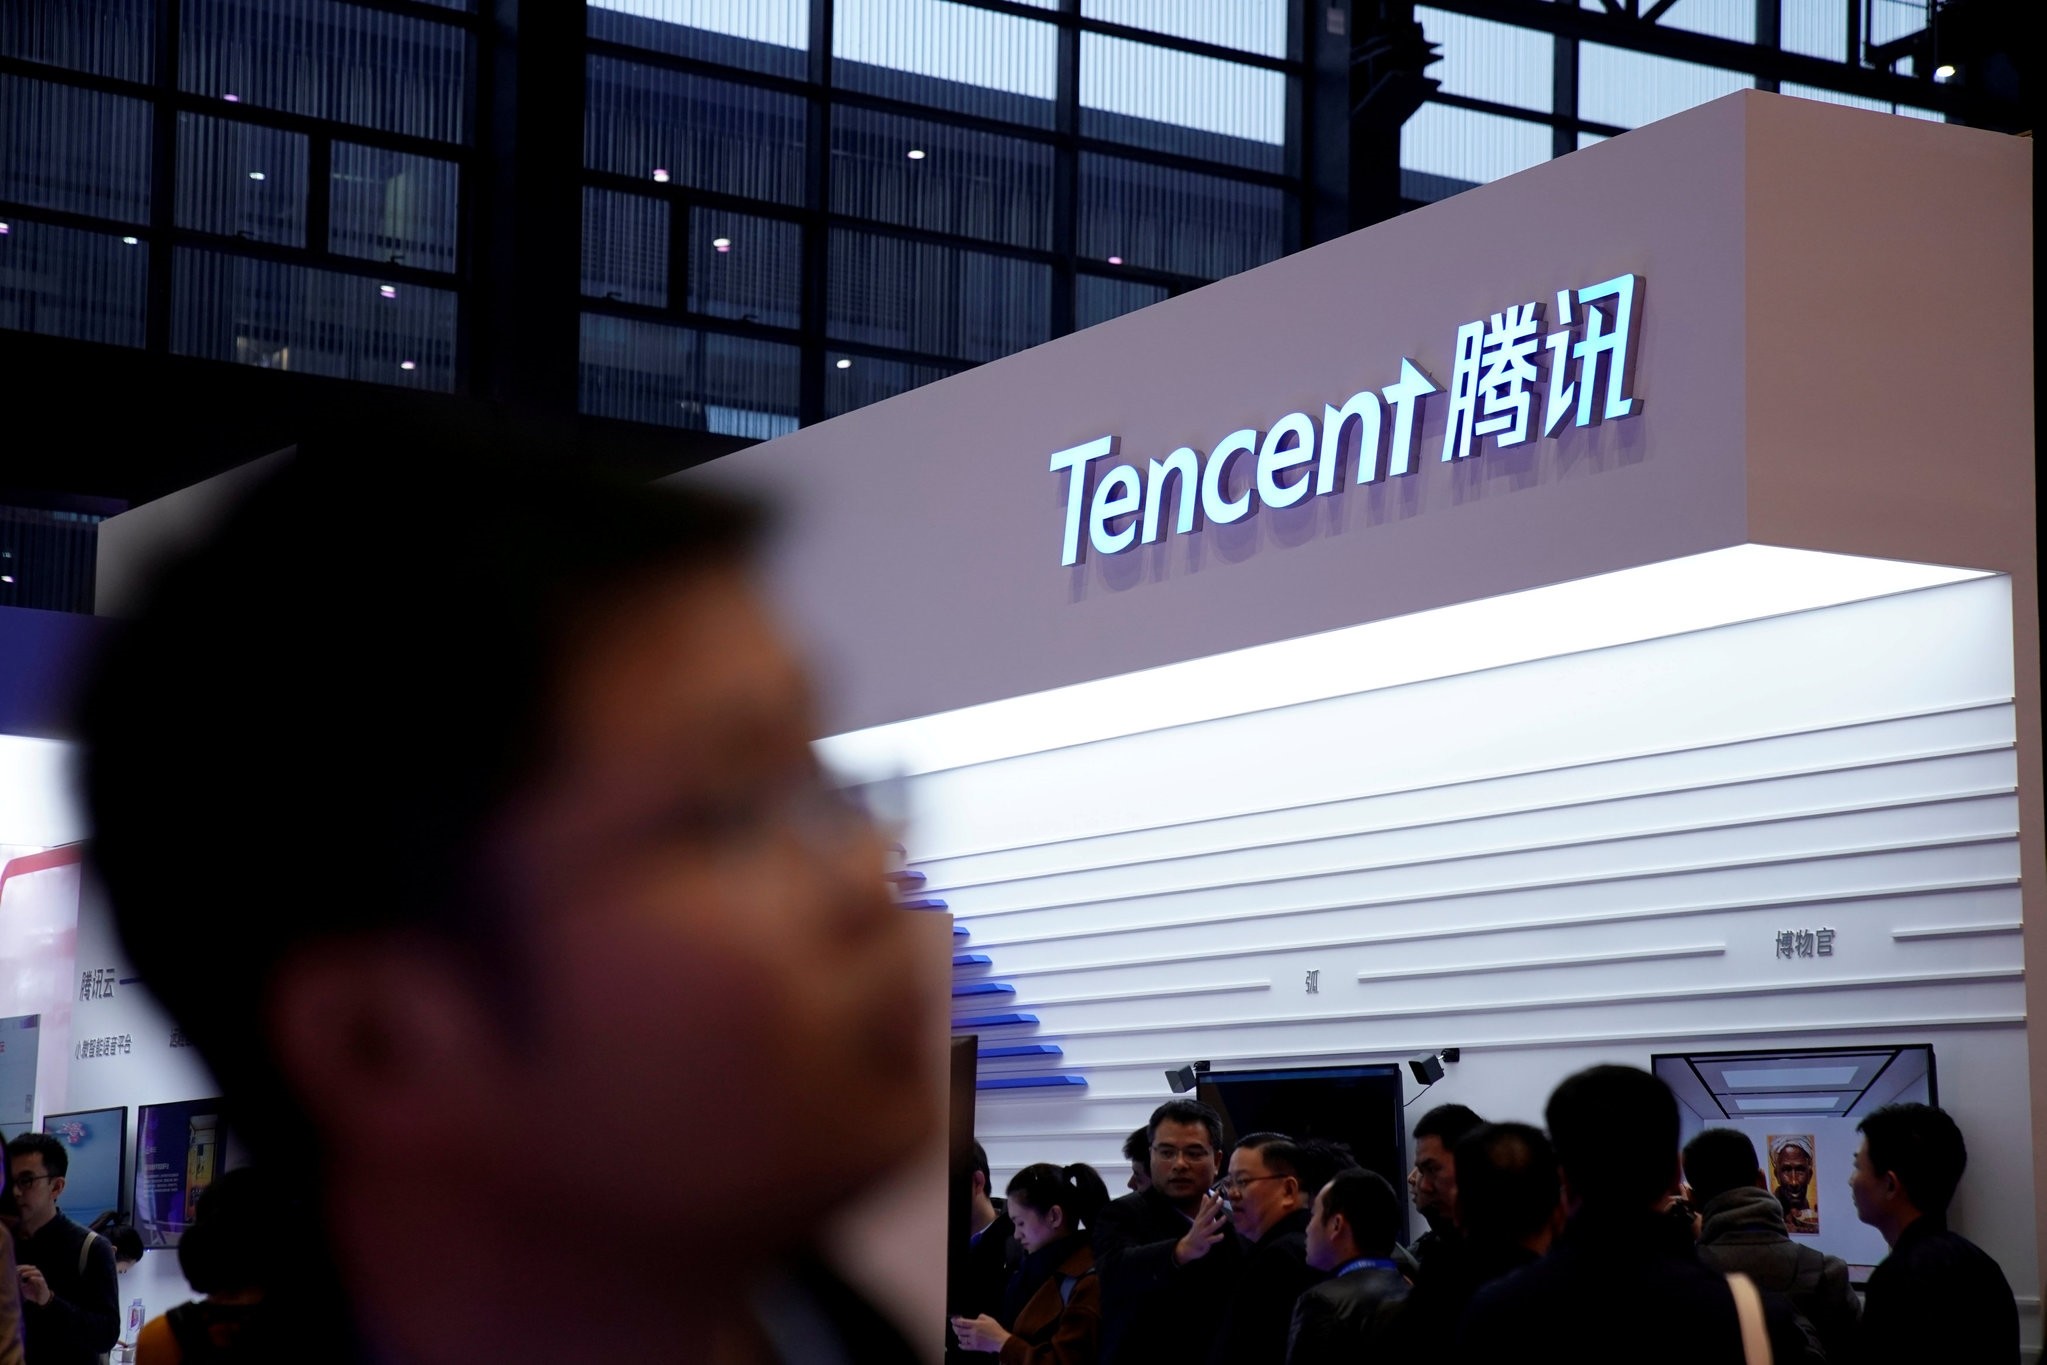 A Tencent sign at the fourth World Internet Conference in Wuzhen, China.